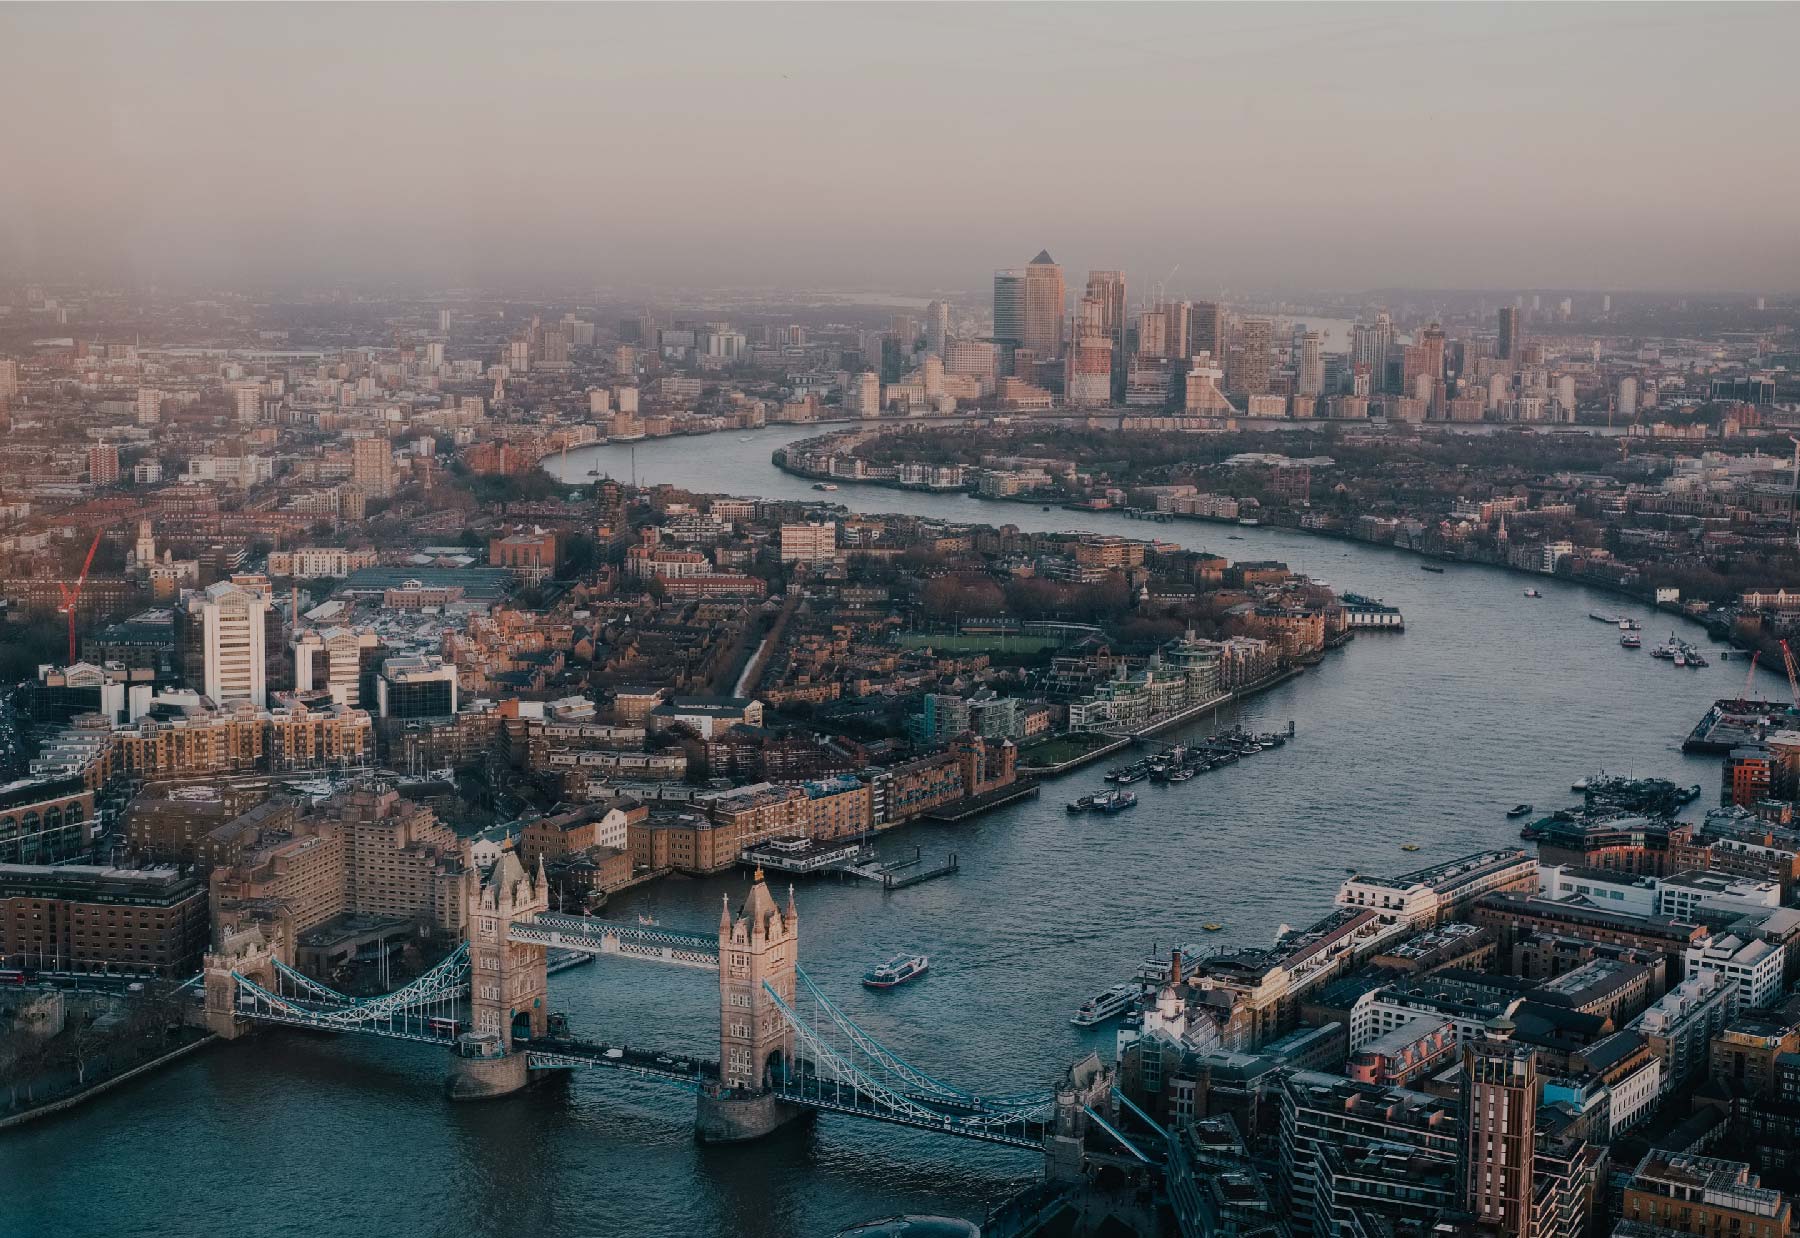 Aerial view of the River Thames winding through the city of London. City skyline with the Tower Bridge in the forefront.